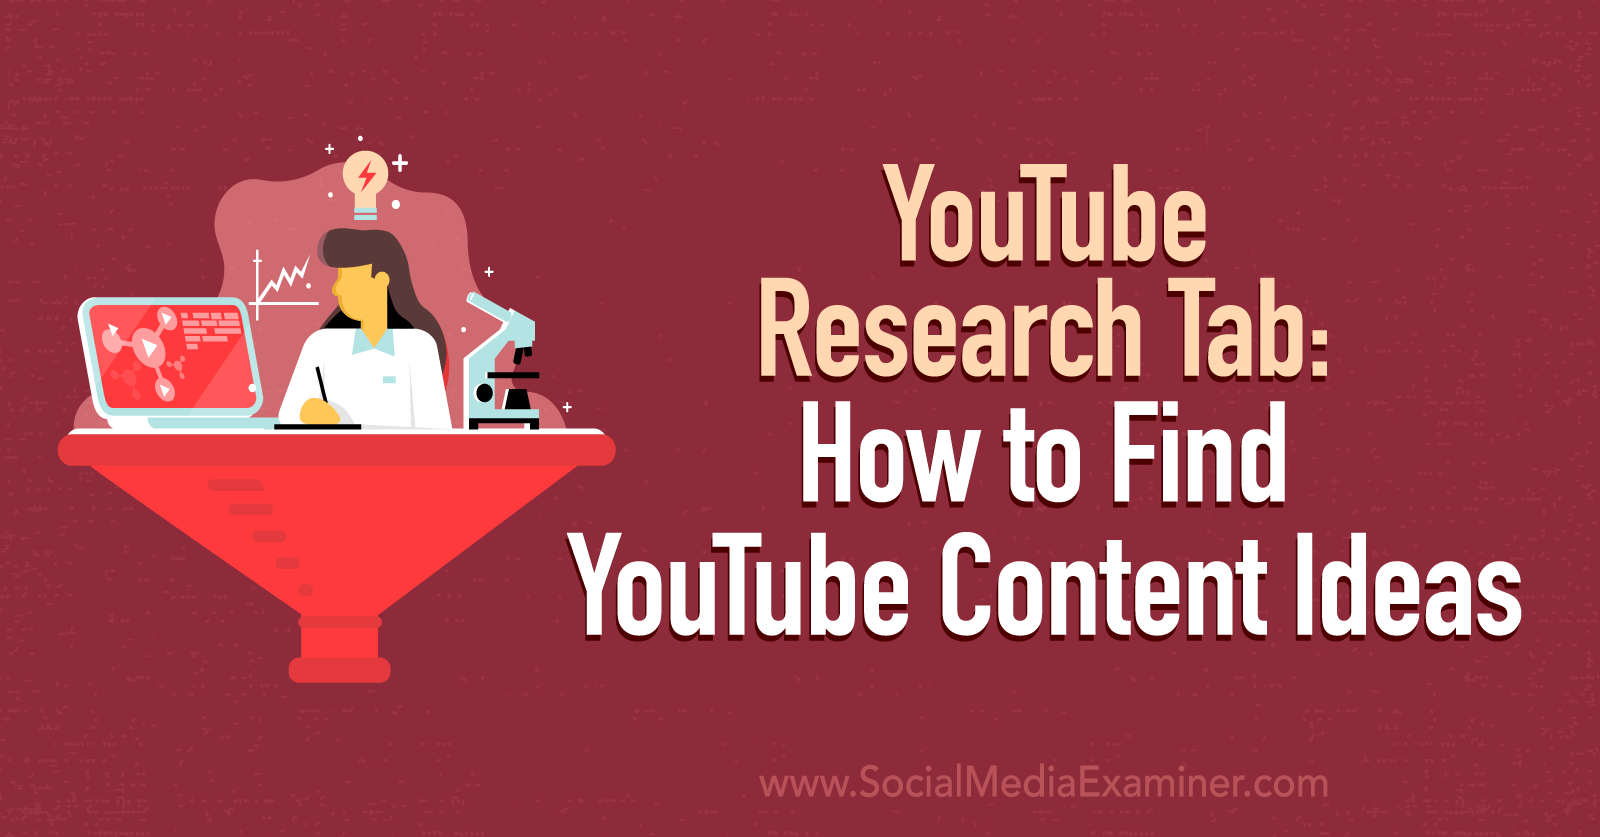 how to research youtube channels